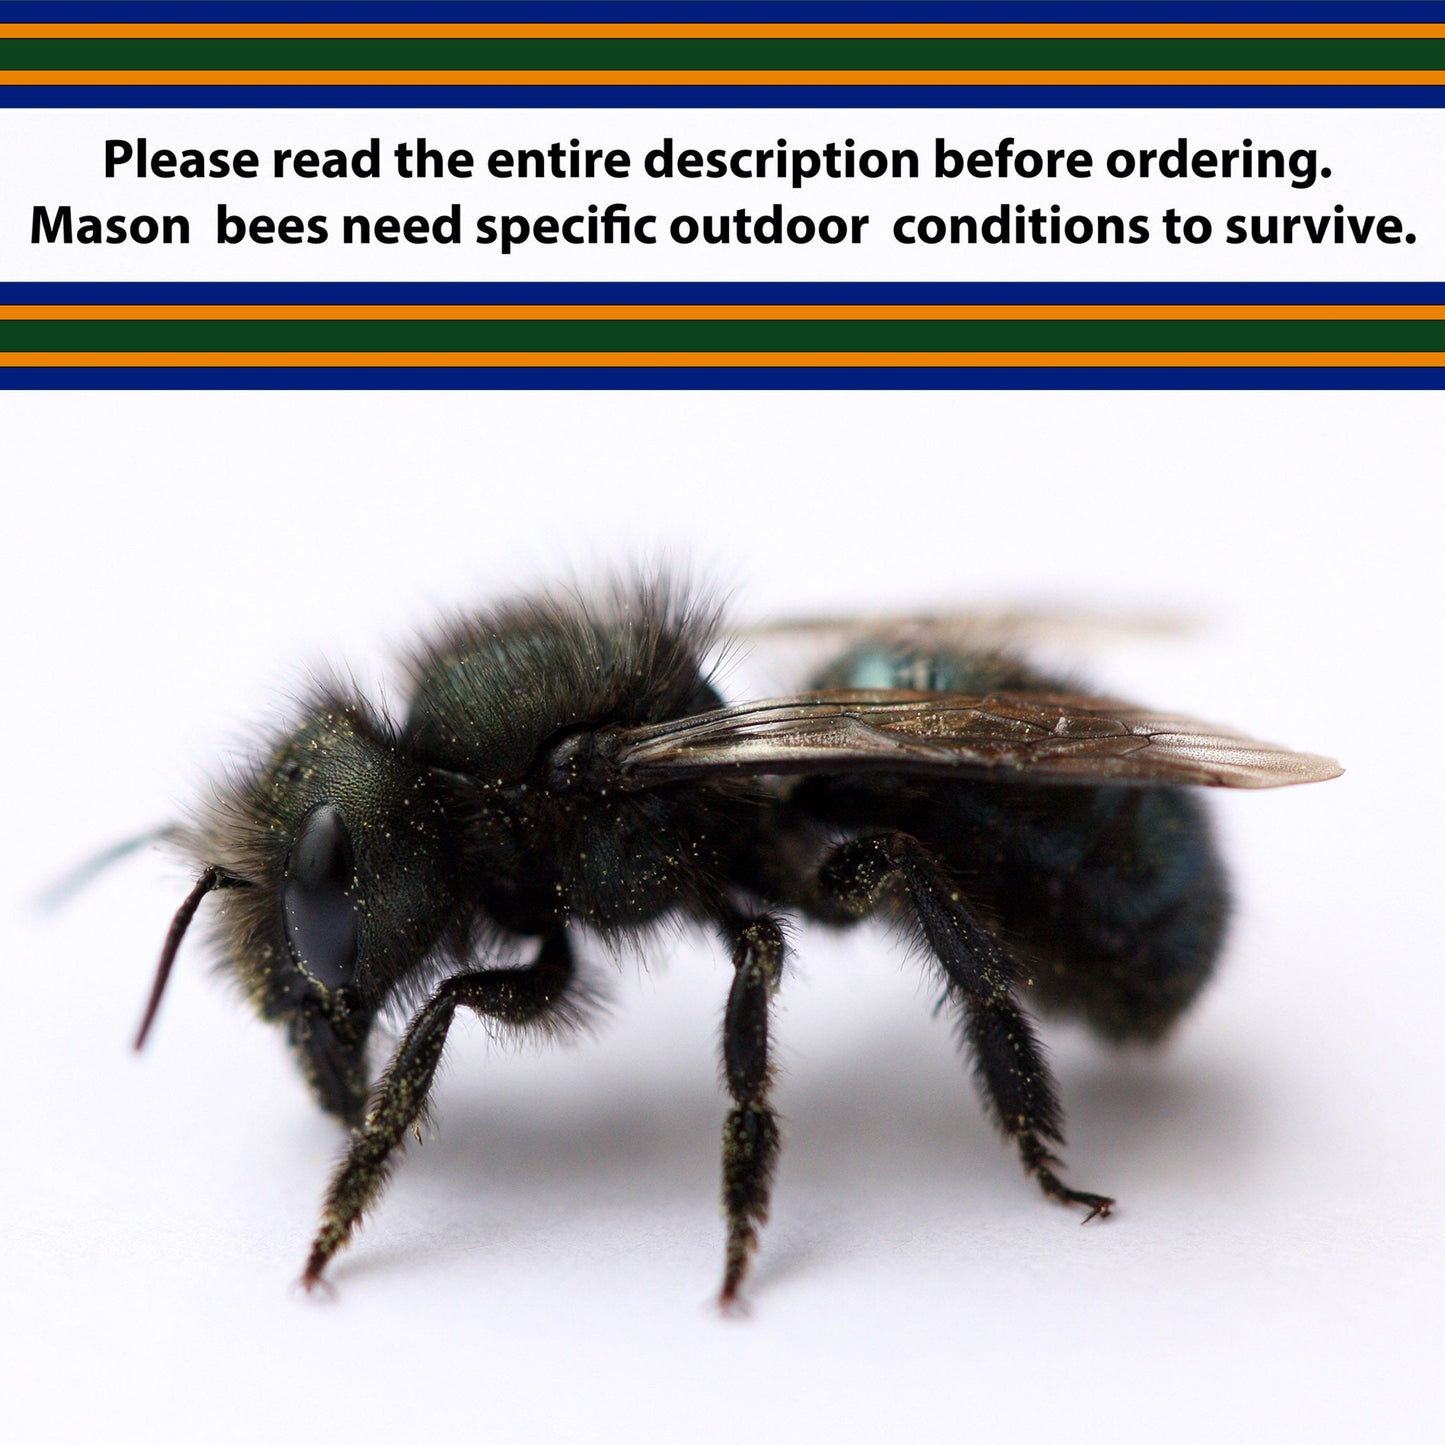 Please Read the entire description before re ordering. Mason bees need specific conditions to survive.